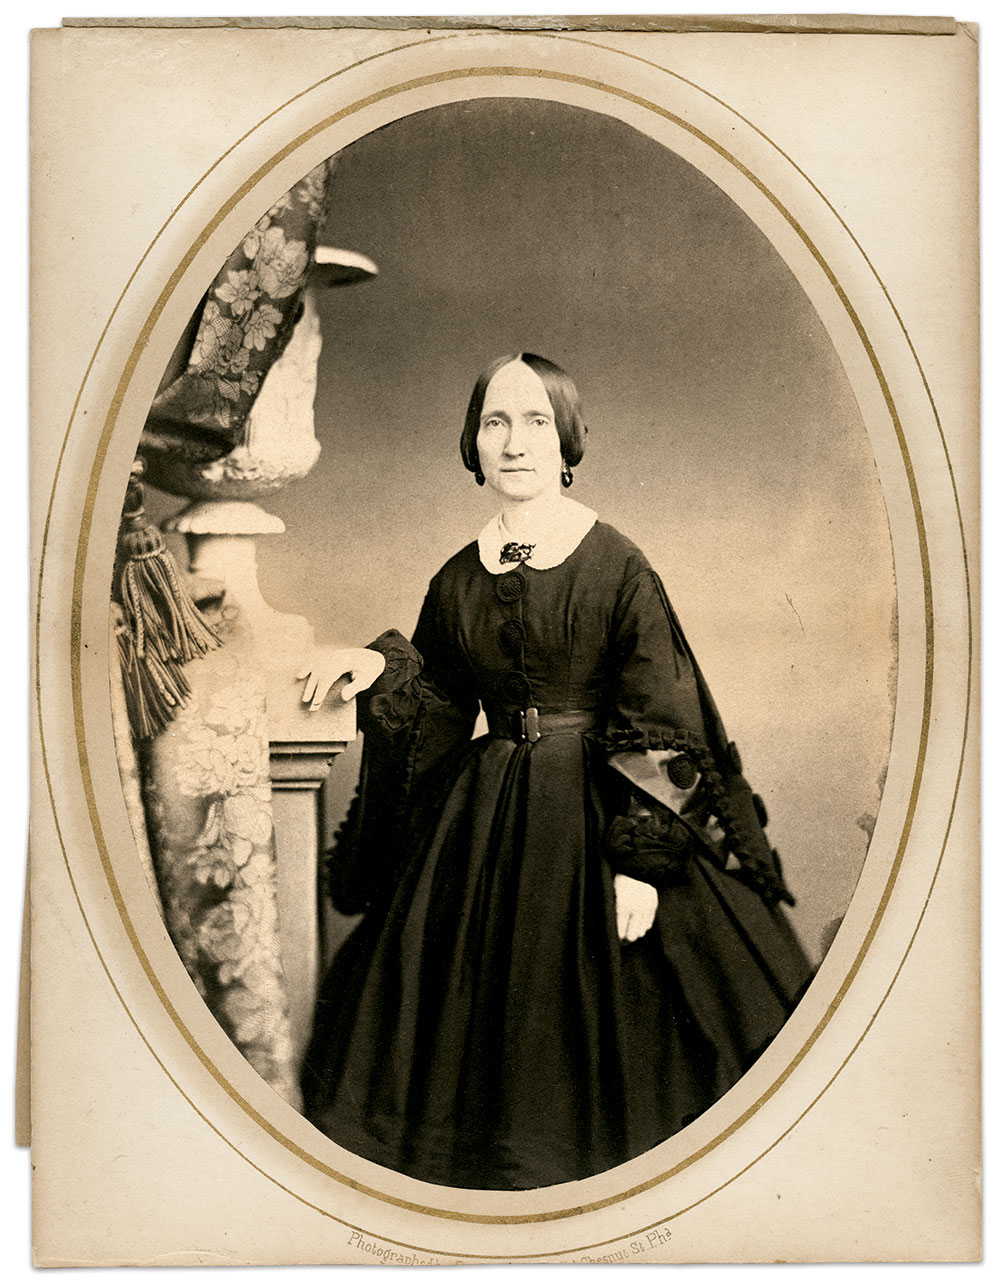 Striking a deal to save hallowed ground: Ann Pamela Cunningham, founder and first Regent of the Mount Vernon Ladies’ Association, negotiated with Washington, pictured here in the 1850s, to transfer ownership of Mount Vernon. Albumen print by Broadbent & Co. of Philadelphia, Pa. Courtesy of The Mount Vernon Ladies’ Association.